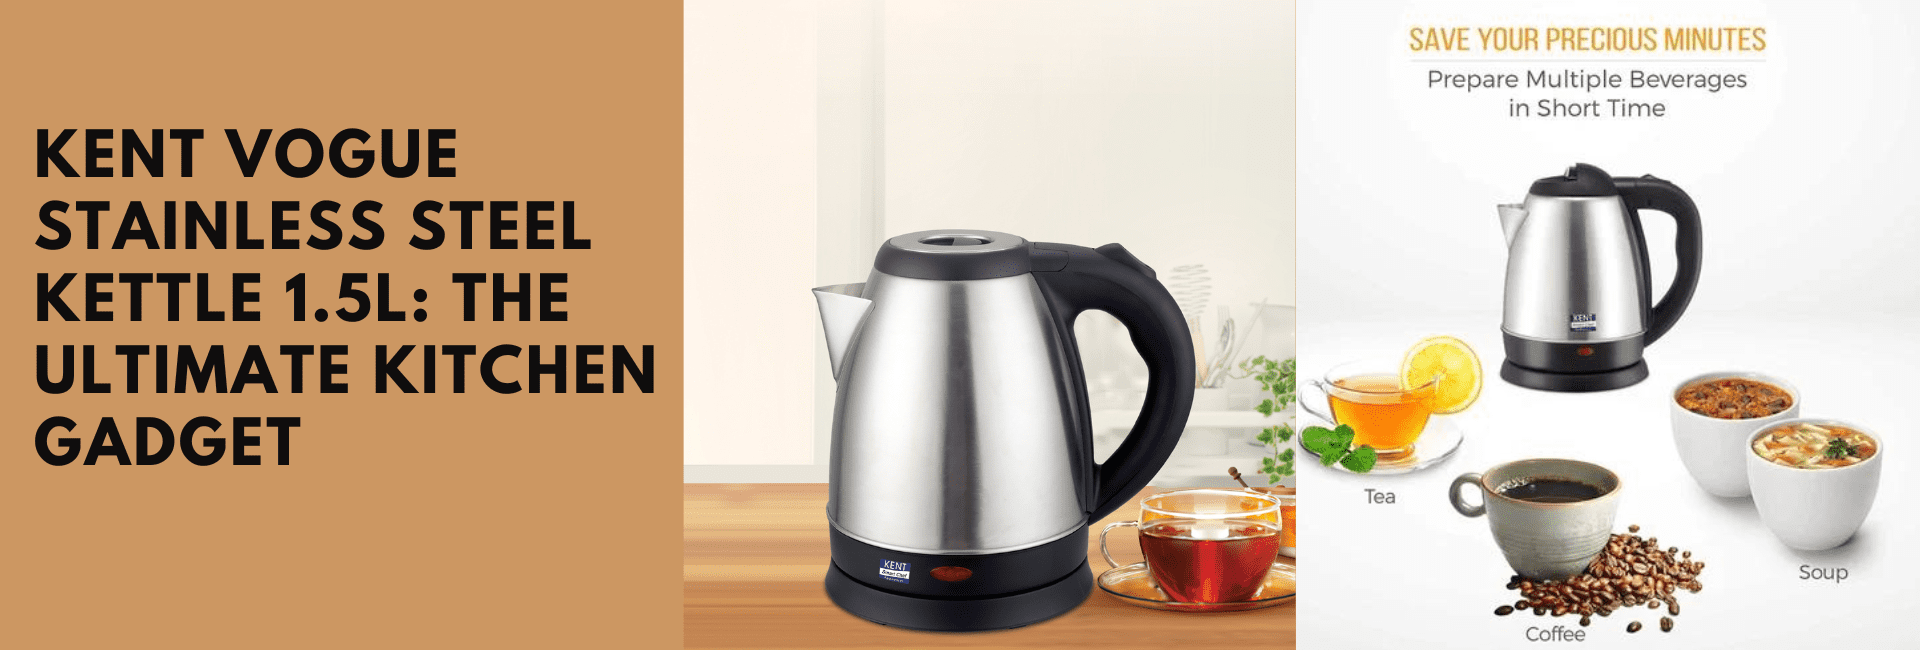 Kent Vogue stainless steel kettle 1.5l: The Ultimate Kitchen Gadget